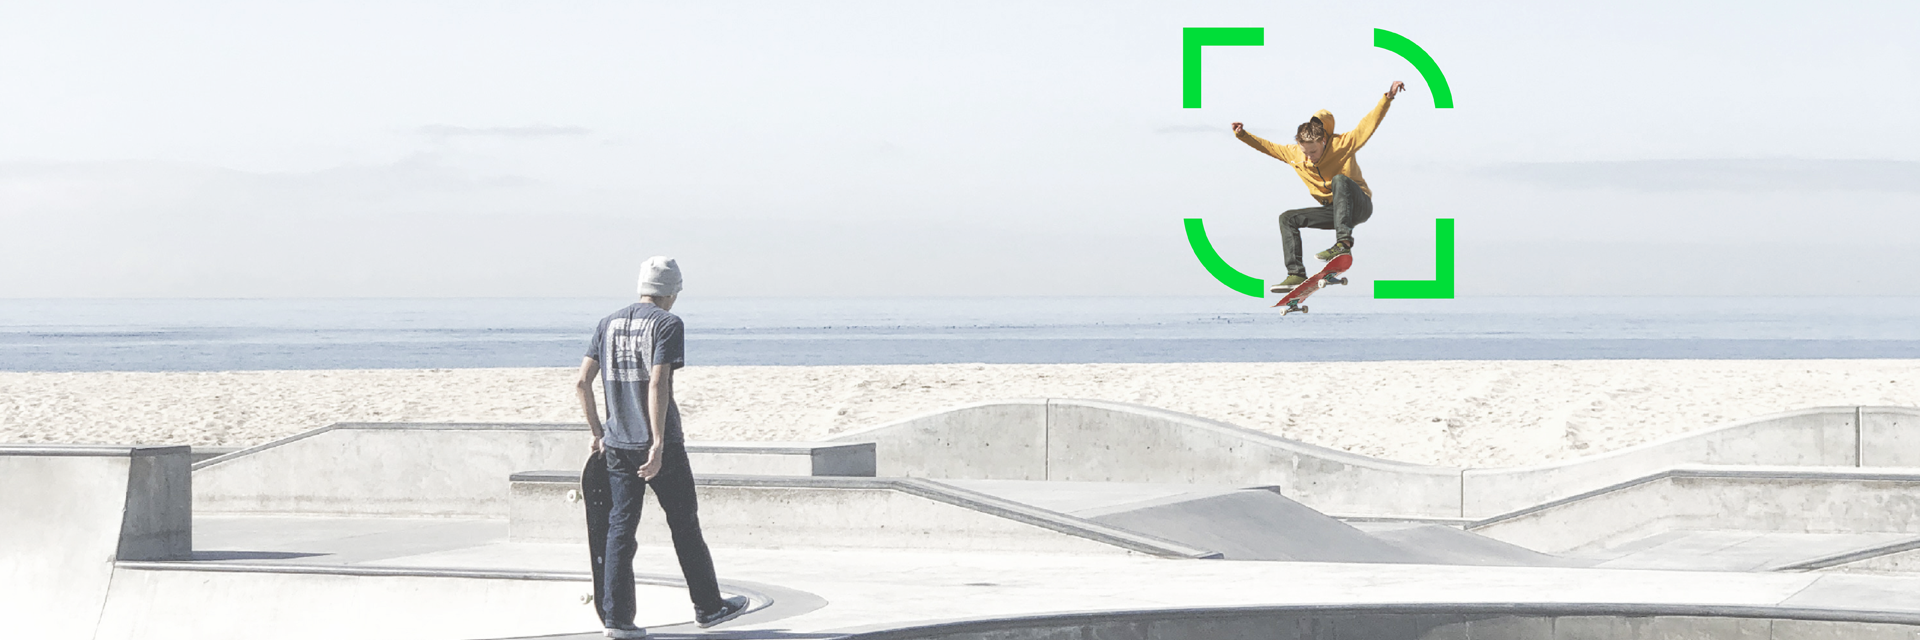 Two people with skateboards in a concrete skate park, one is doing a jump, sea in the background